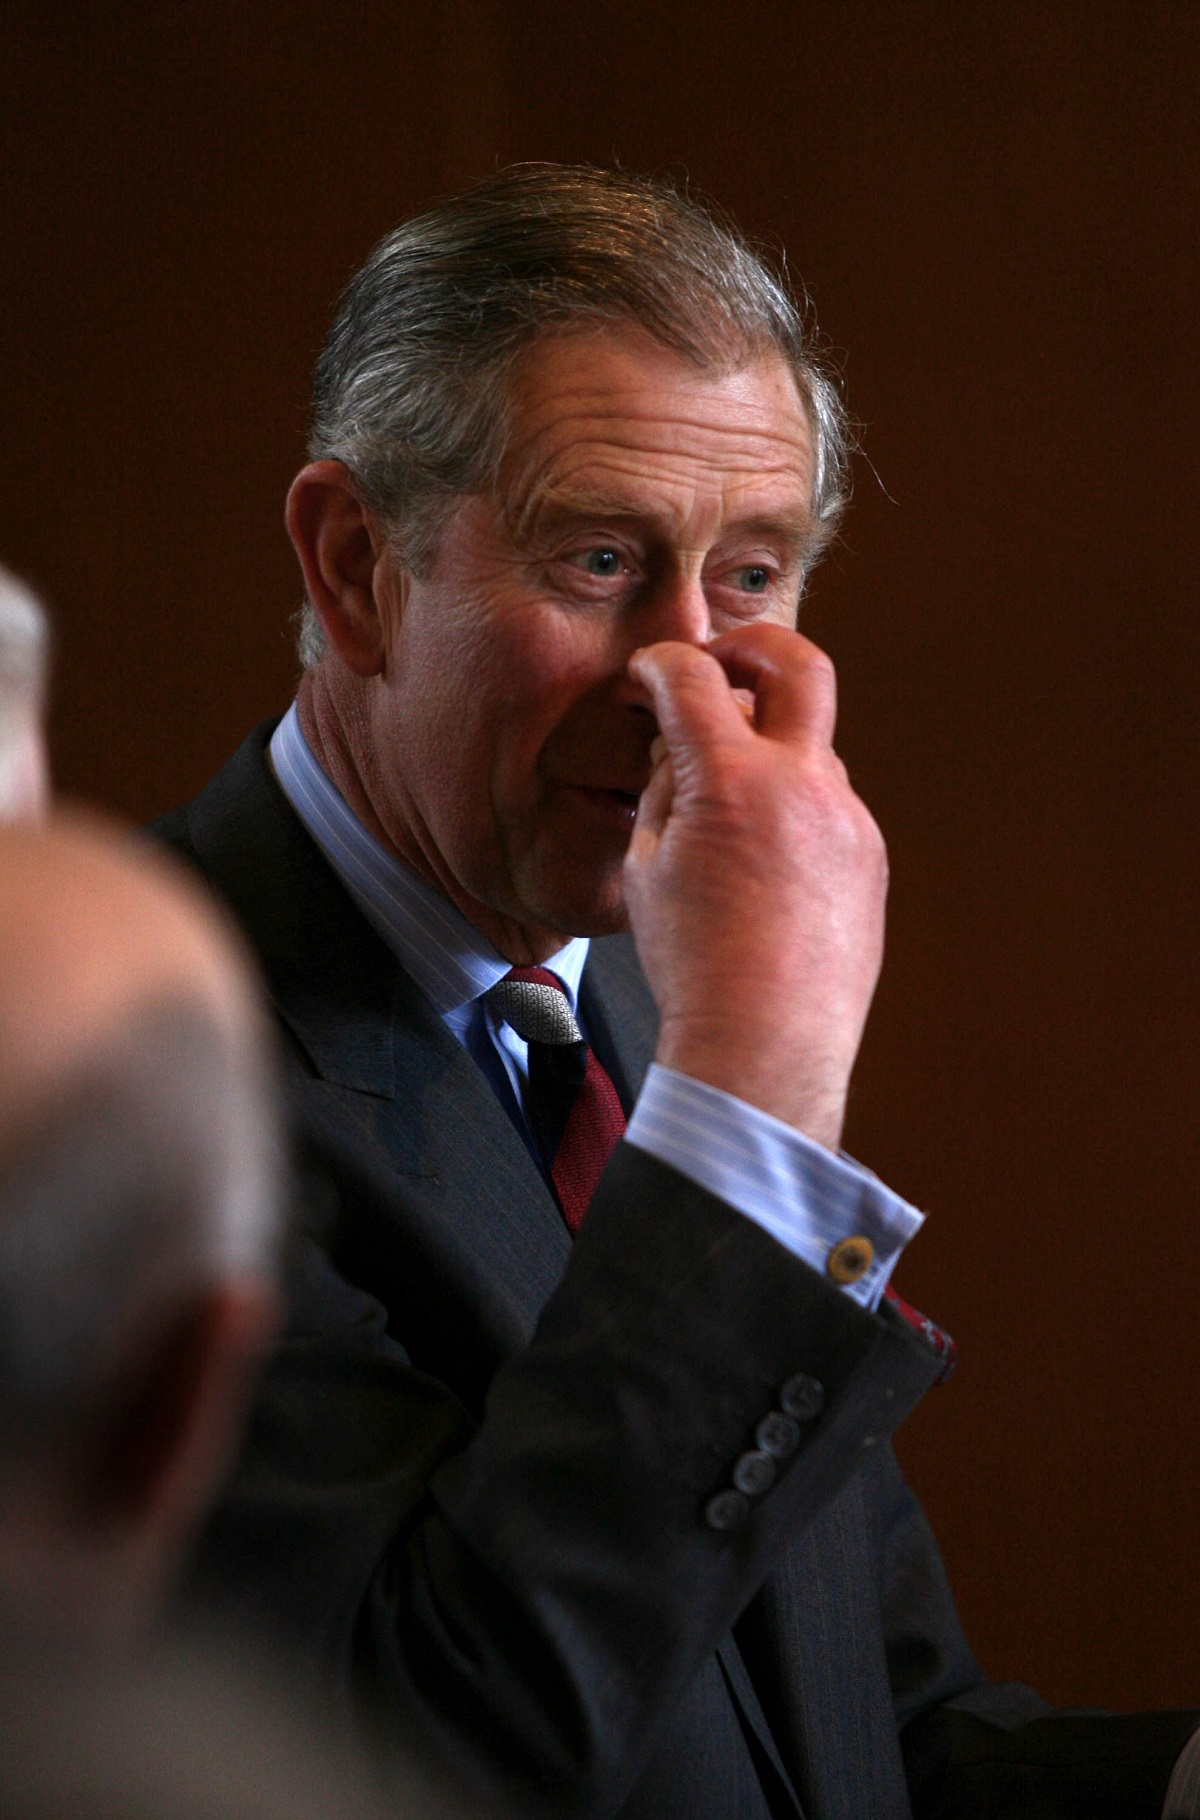 King Charles III scratching his nose with two fingers during a engagement in Walton-on-Thames, England